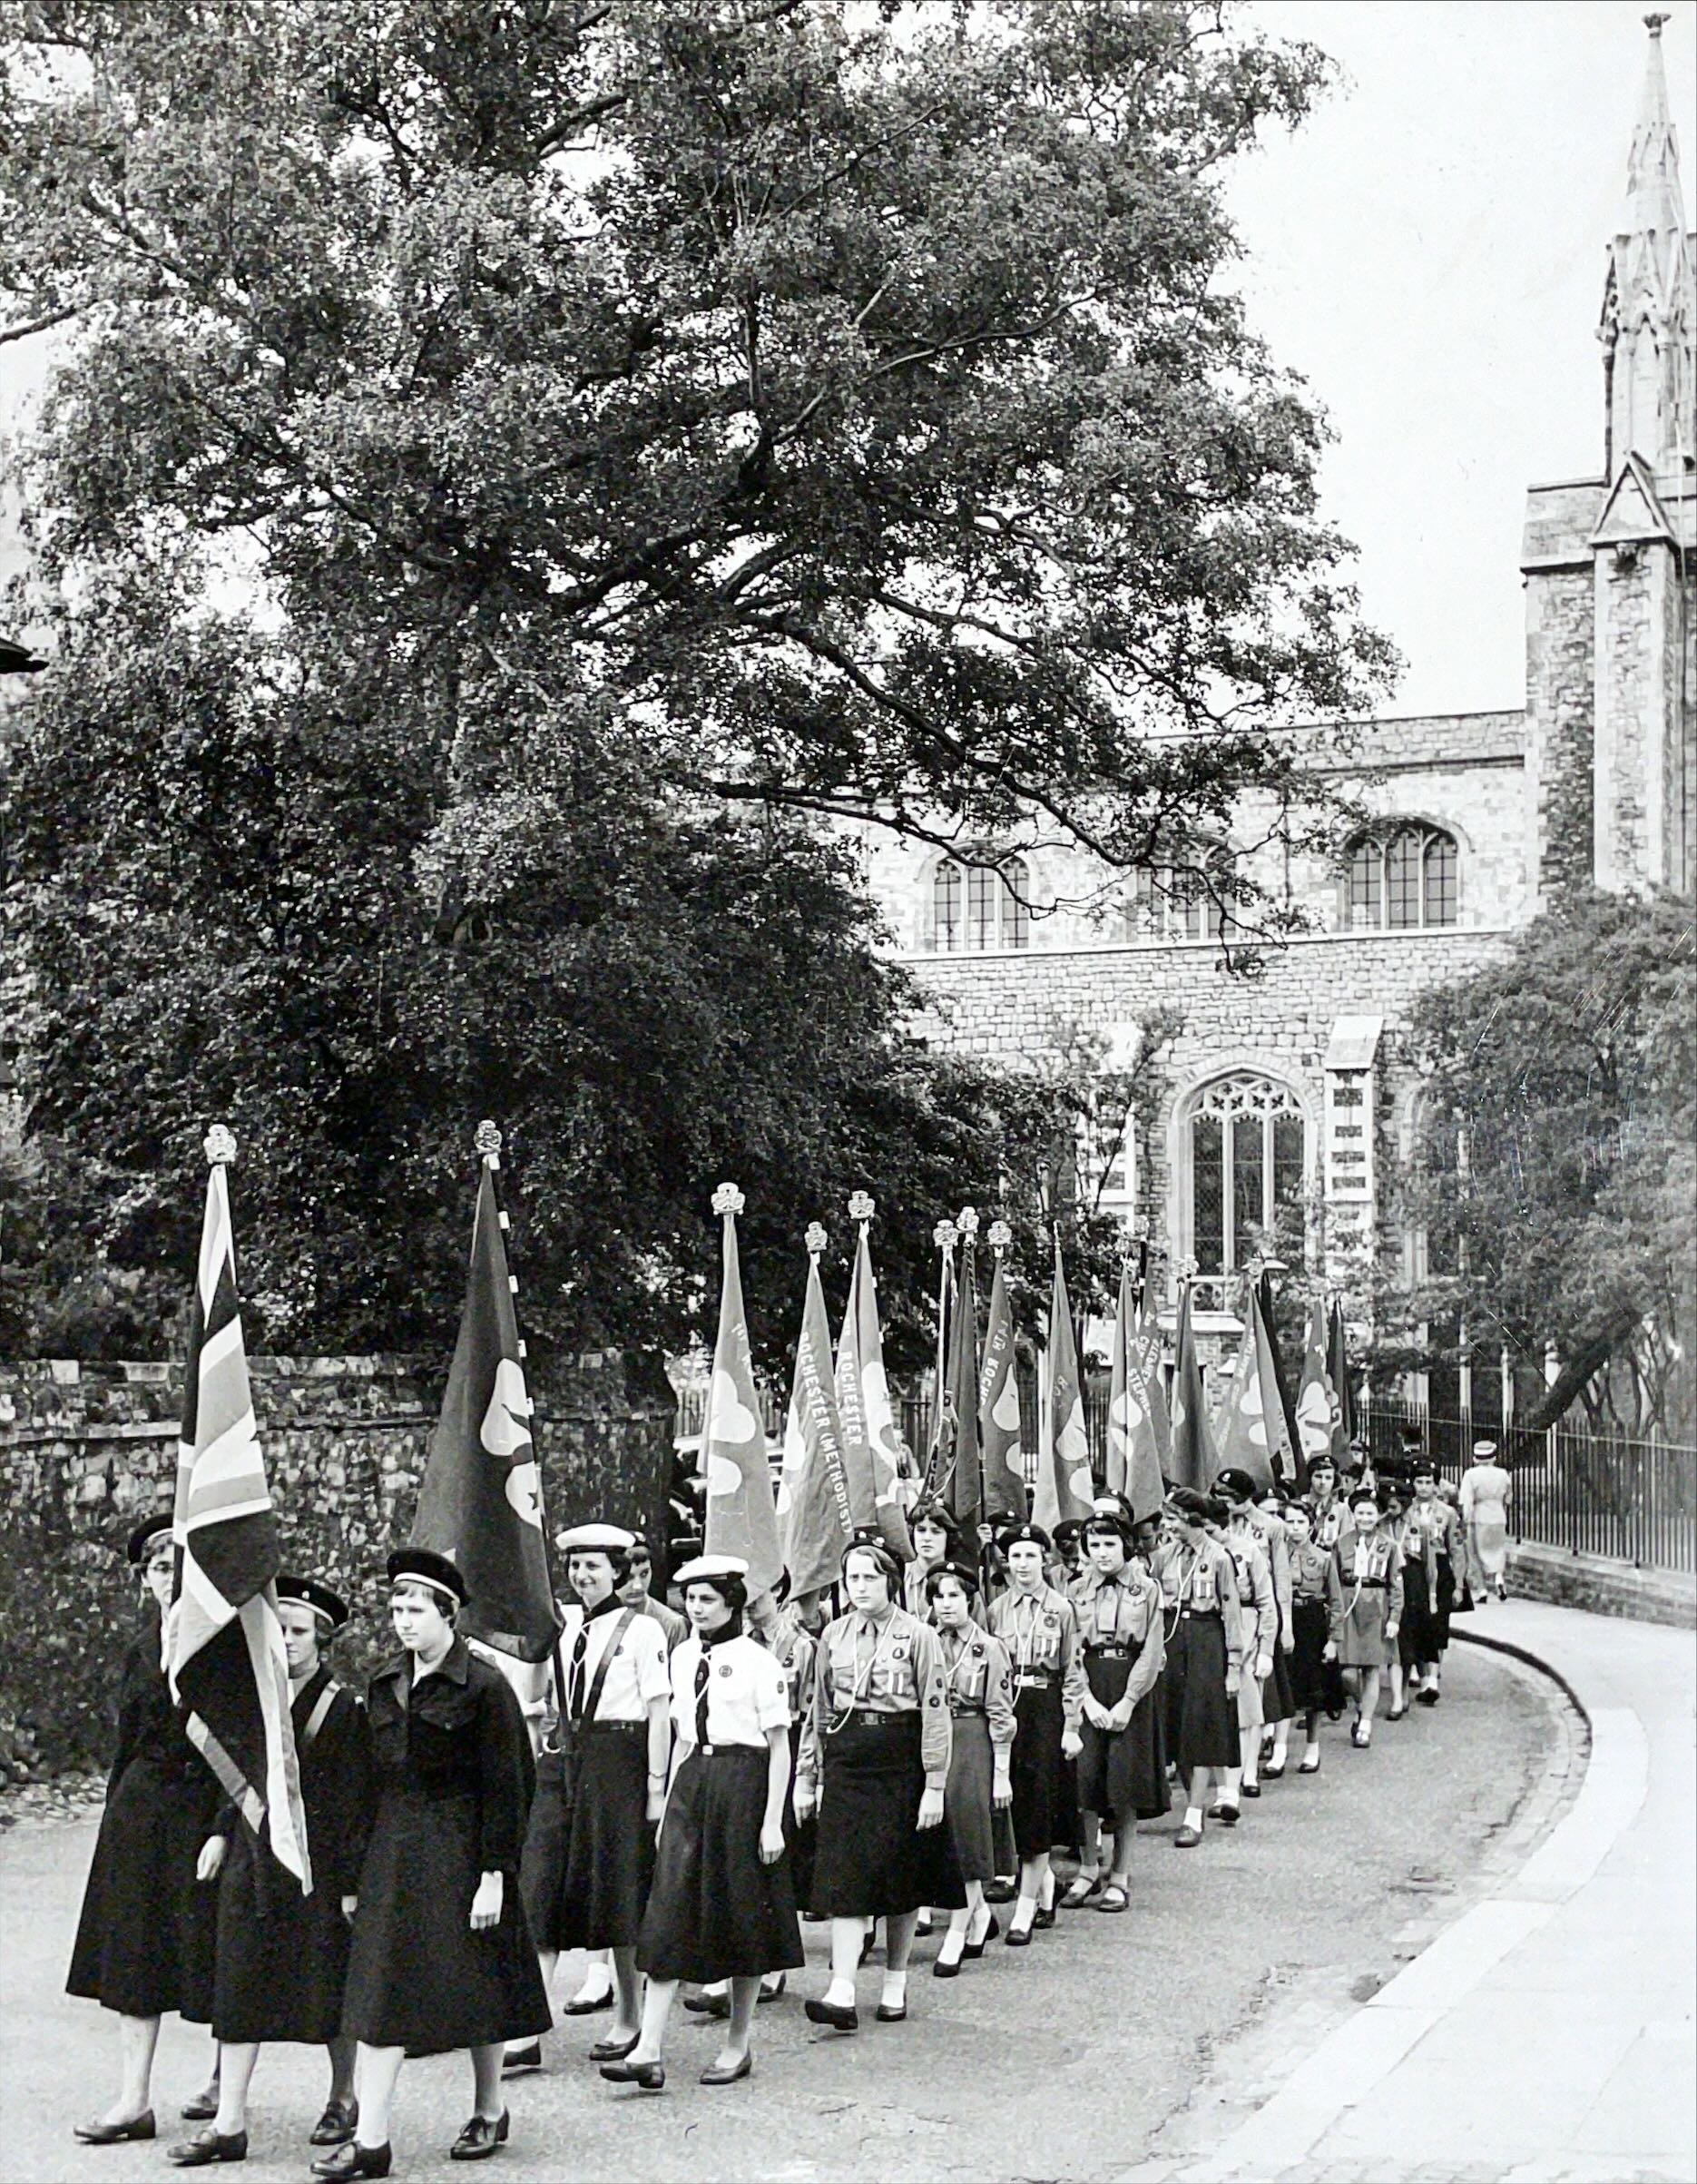 Medway West Division Girl Guides' Parade, July 1958